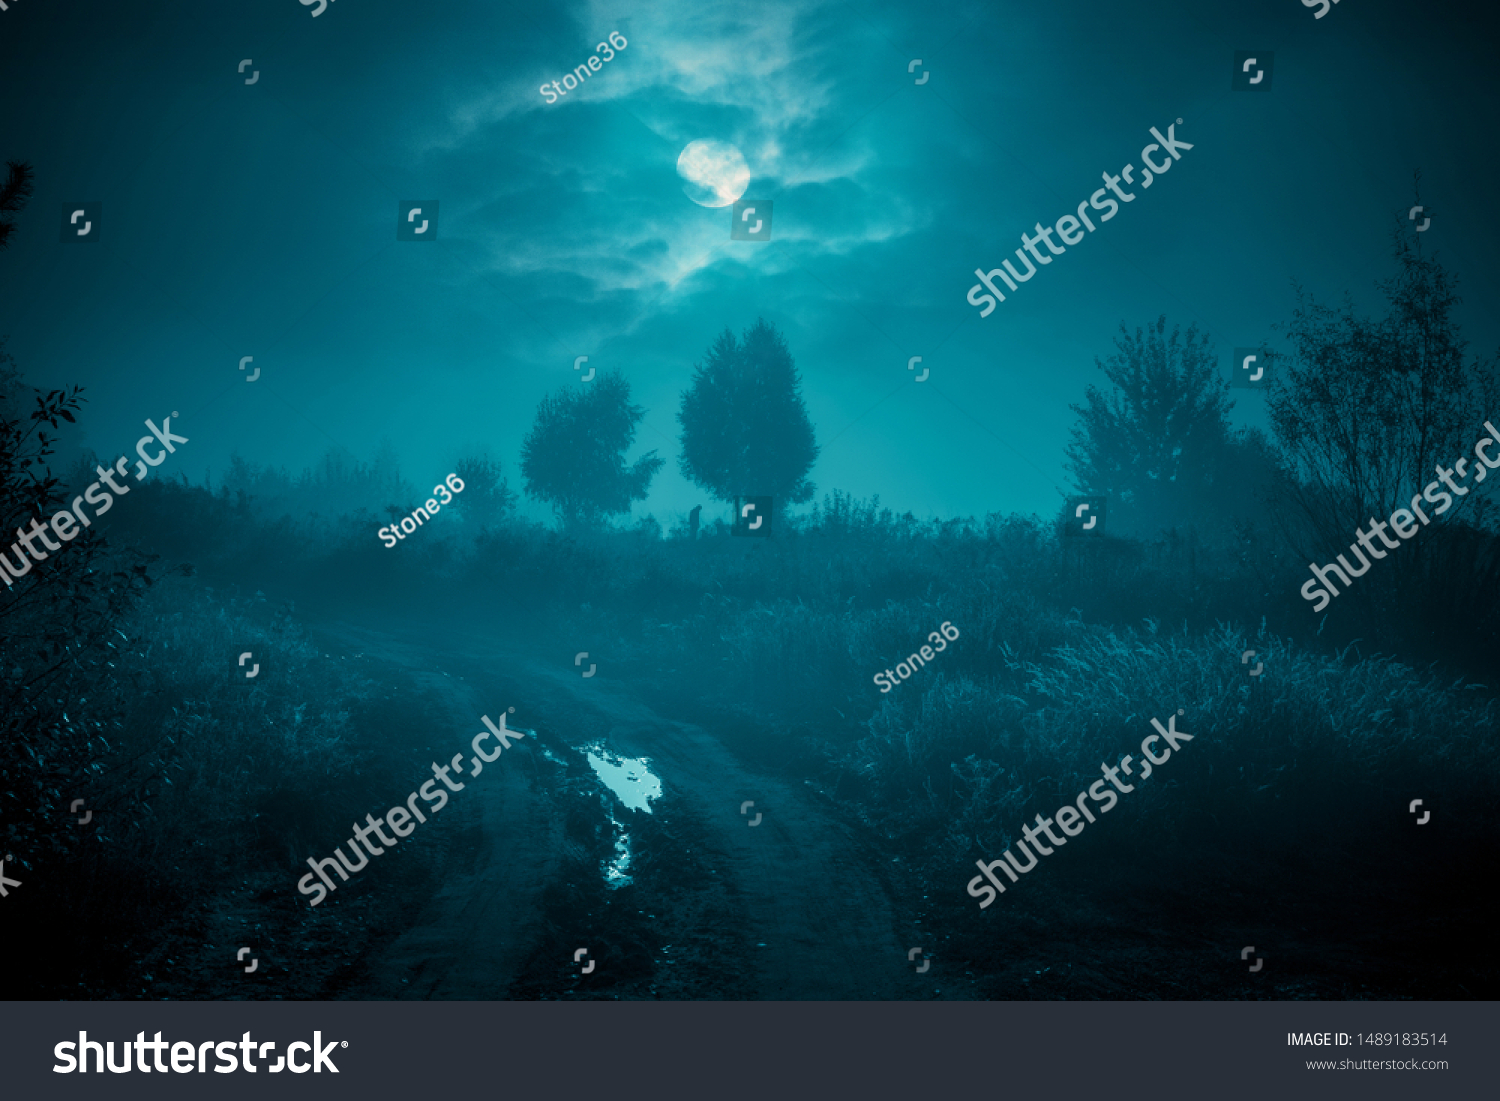 Night mysterious landscape in cold tones - silhouettes of the trees under the full moon through the clouds on dramatic night sky. #1489183514